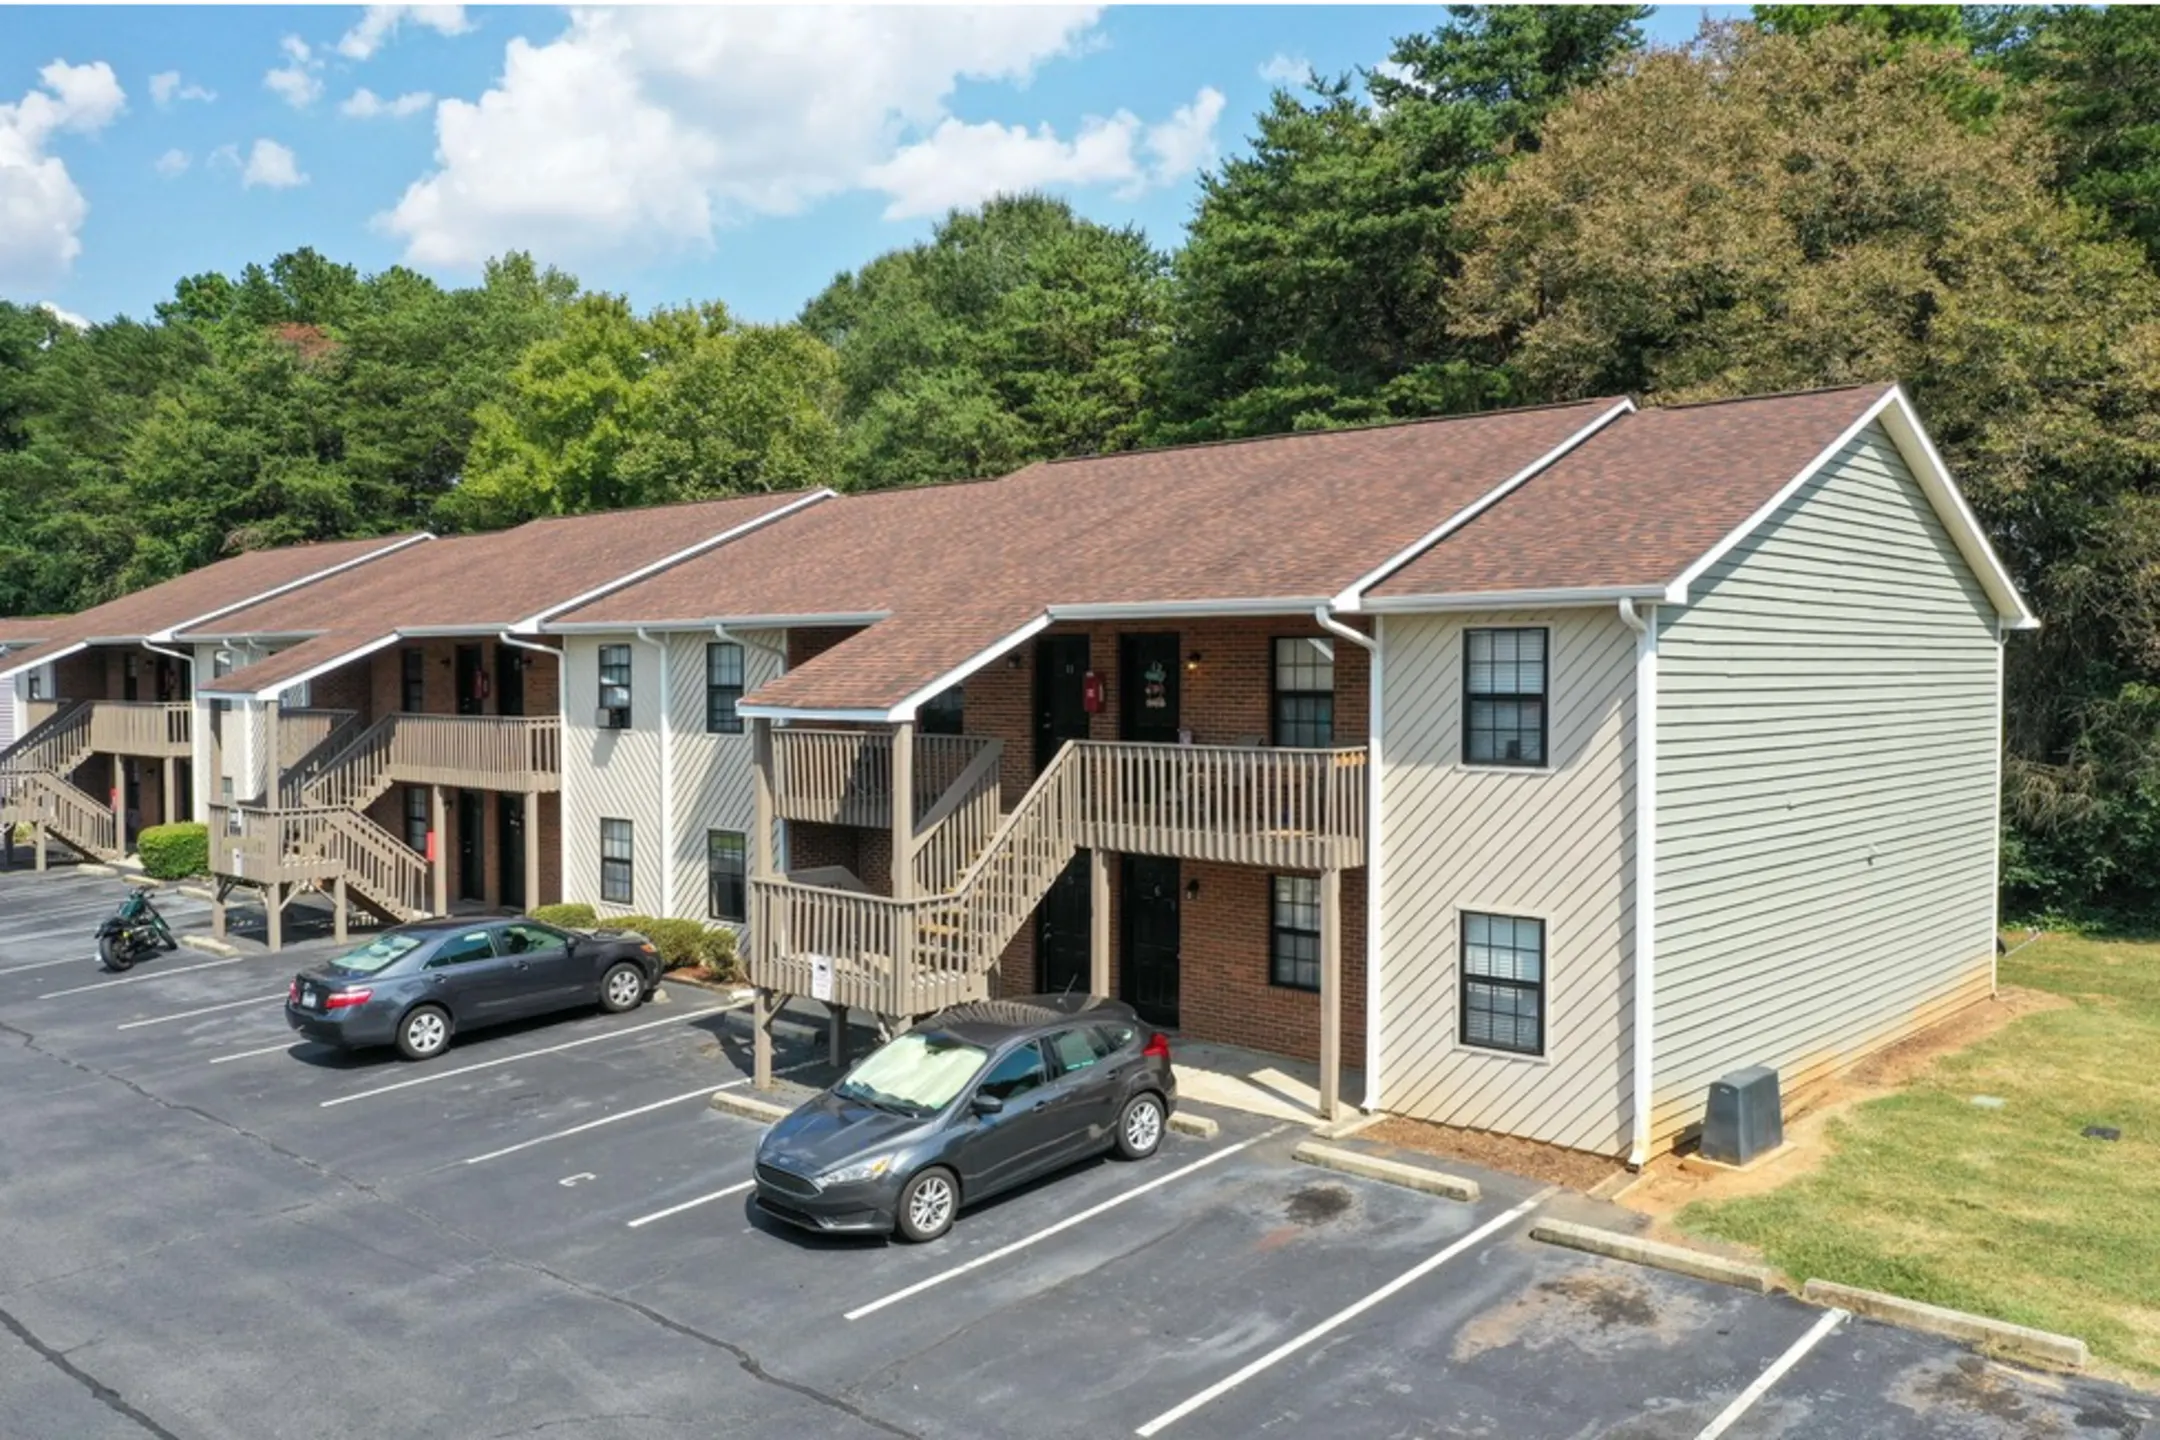 Building - Country Club Apartments - Mooresville, NC